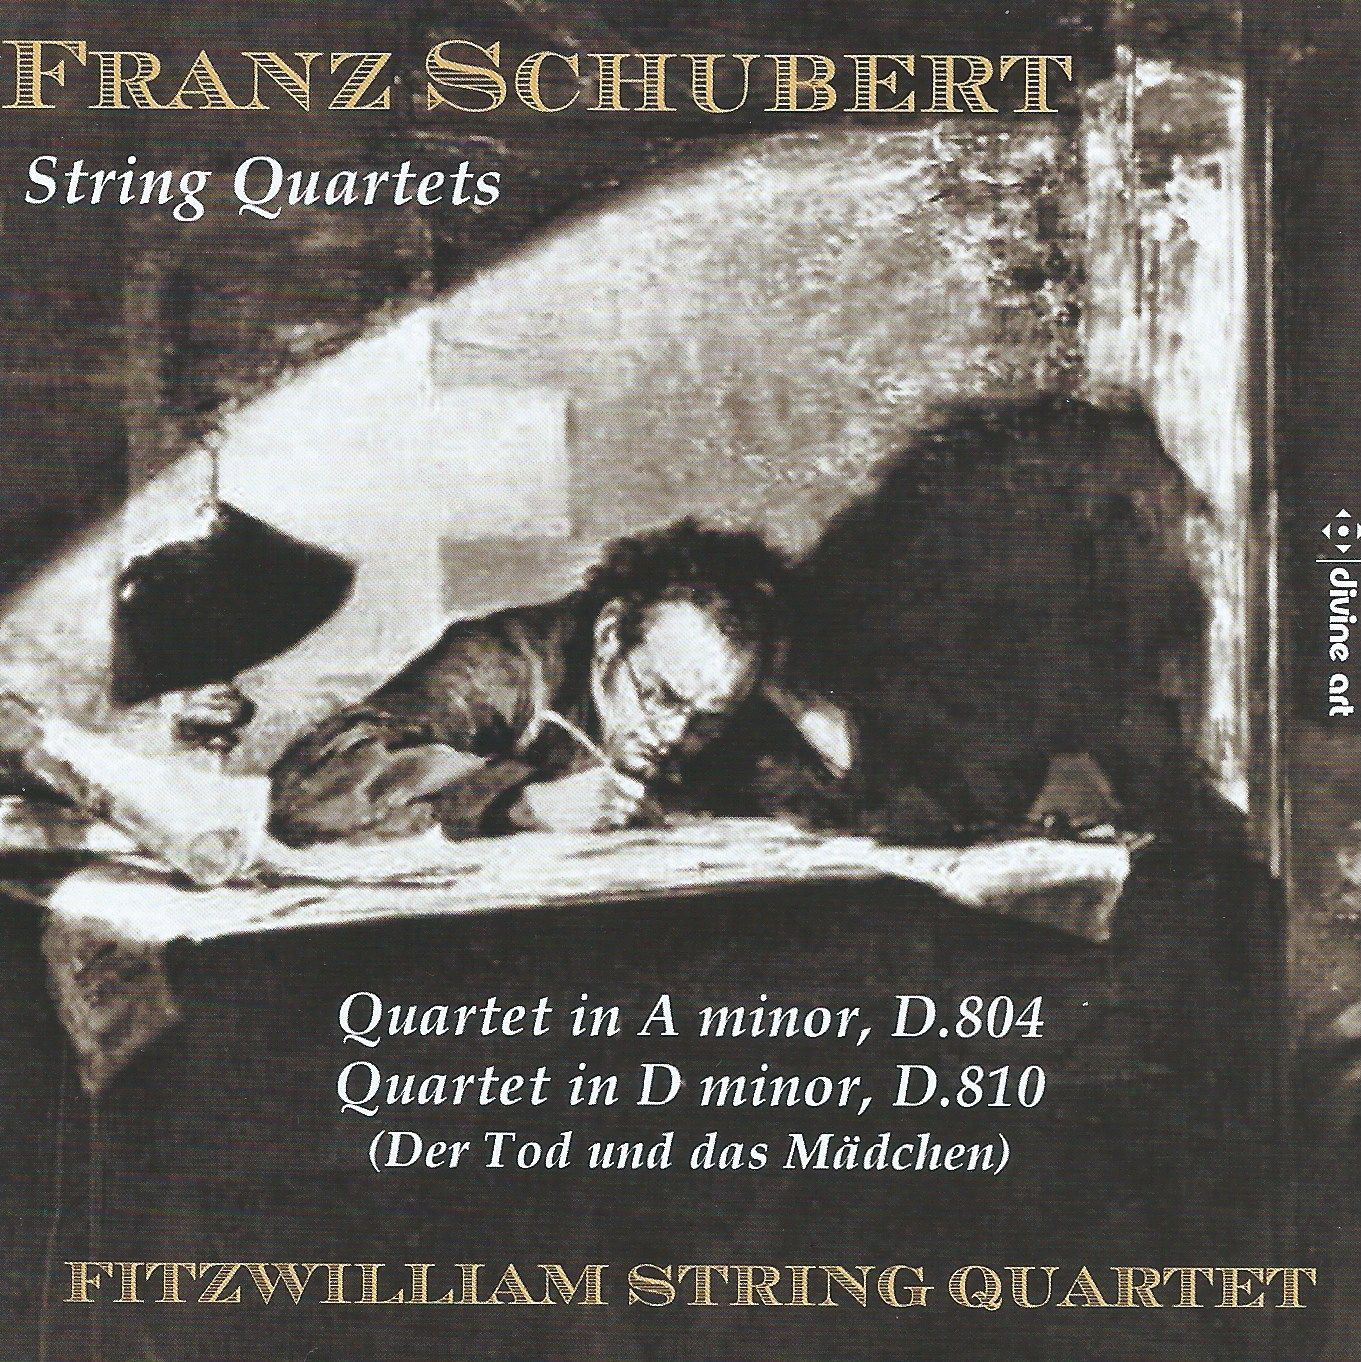 Death and the Maiden: The Fitzwilliam Quartet and Schubert